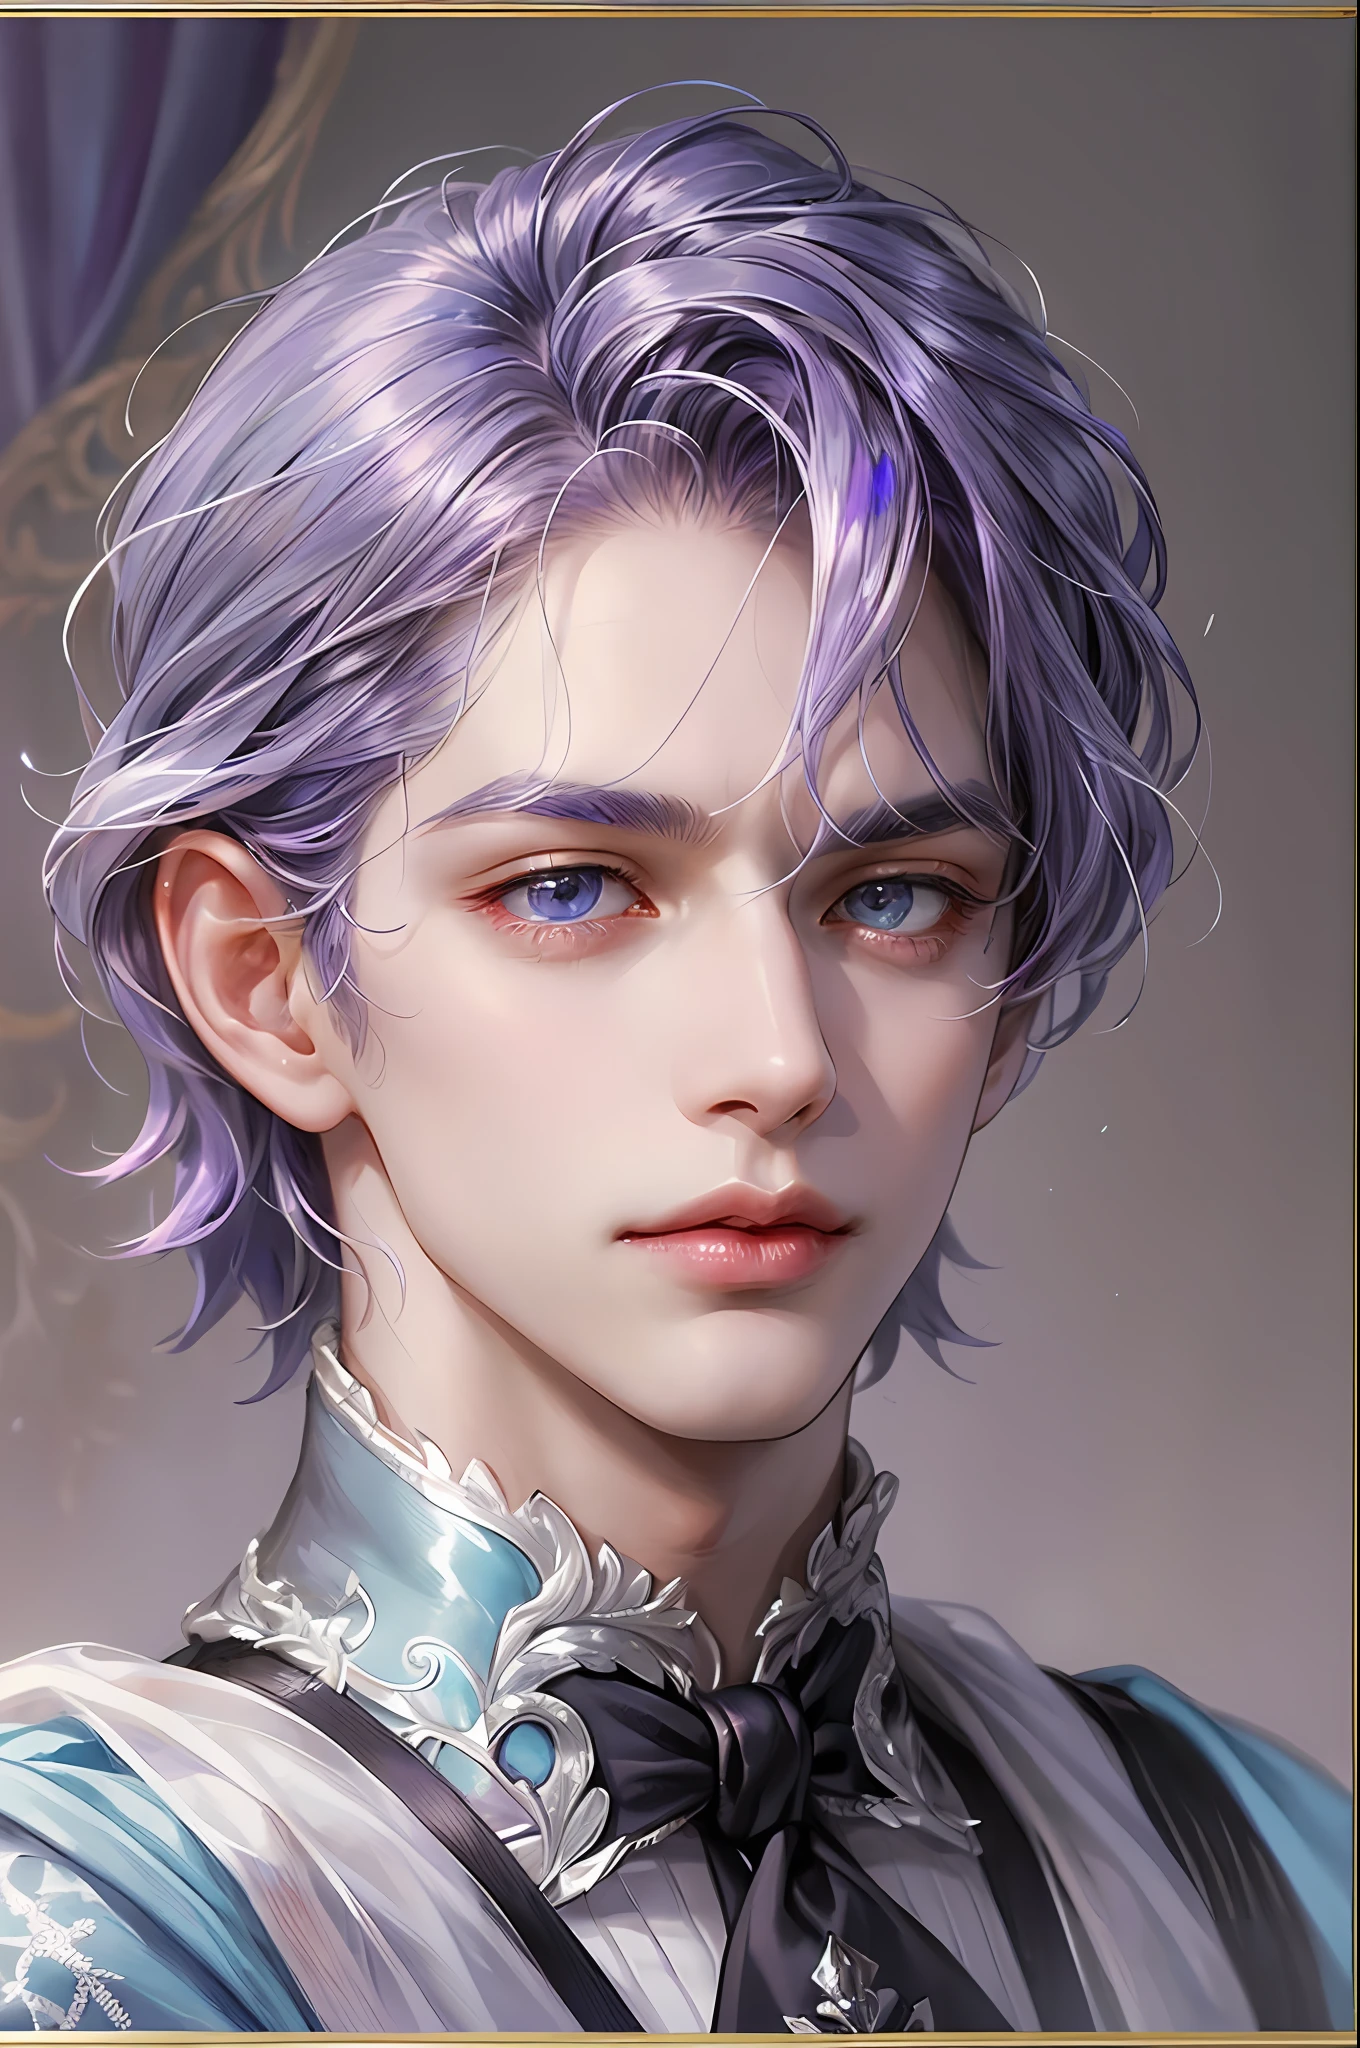 Prince, Young Man, male, 1boy, mature male, manly, purple blood, purple decoration, crystal, gemstone, shine, shiny crystal, depicting delicate eyes, opal eyes, depicting delicate facial features, white uniform, extreme multiplication, exquisite and complex design, white gloves, gothic style, gorgeous aristocratic dress, purple blood, ribbon, crown of thorns, gray hair, extreme detail, delicate depiction, light blue eyes, all colors except purple are low saturation, Only purple is the most conspicuous, royal, elegant, noble, royal dress